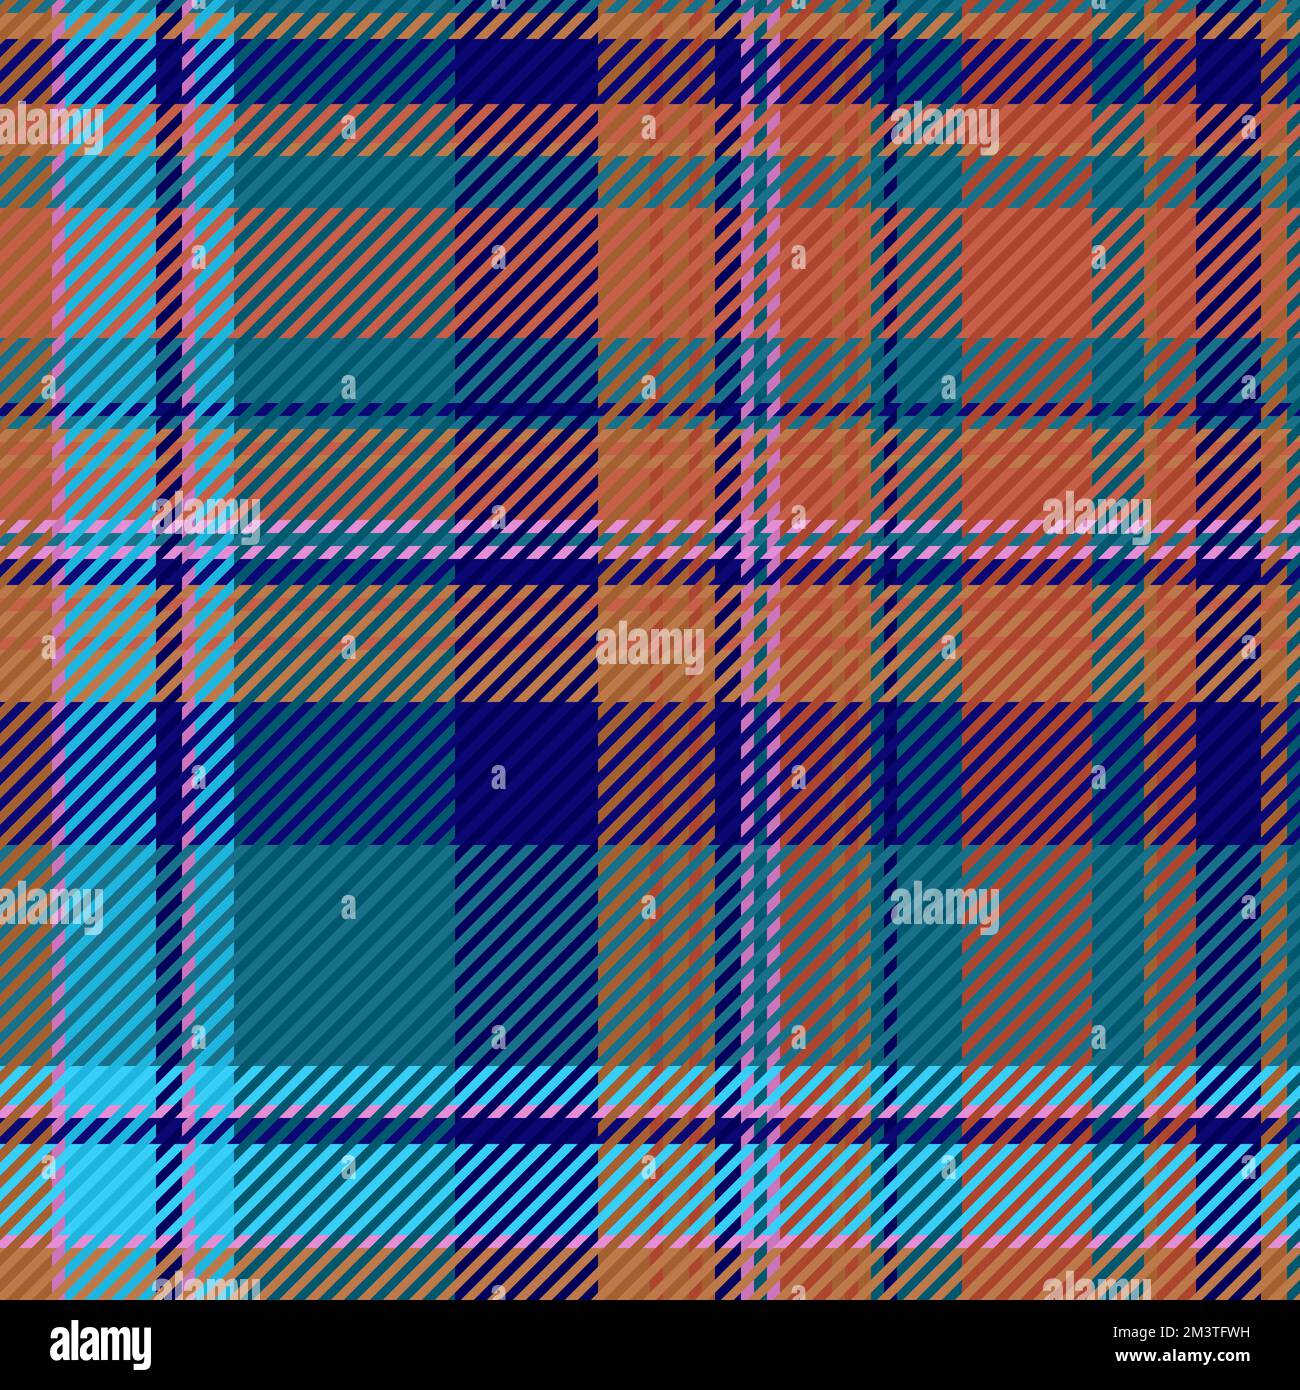 Tartan vector plaid. Check pattern fabric. Texture textile seamless background in blue and pink colors. Stock Vector